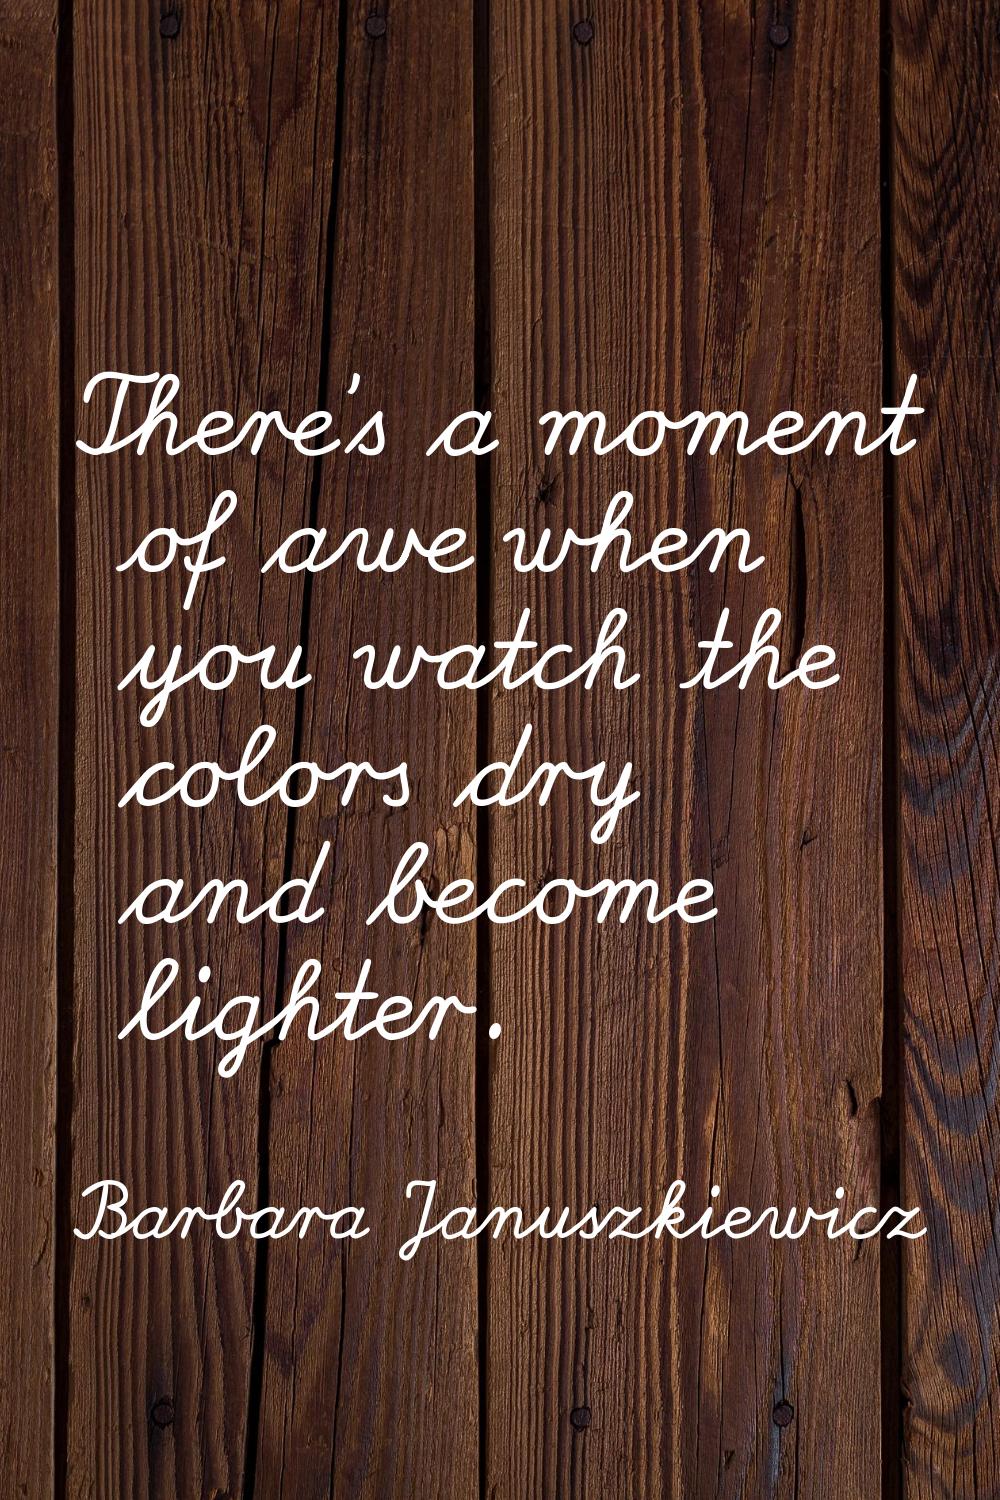 There's a moment of awe when you watch the colors dry and become lighter.